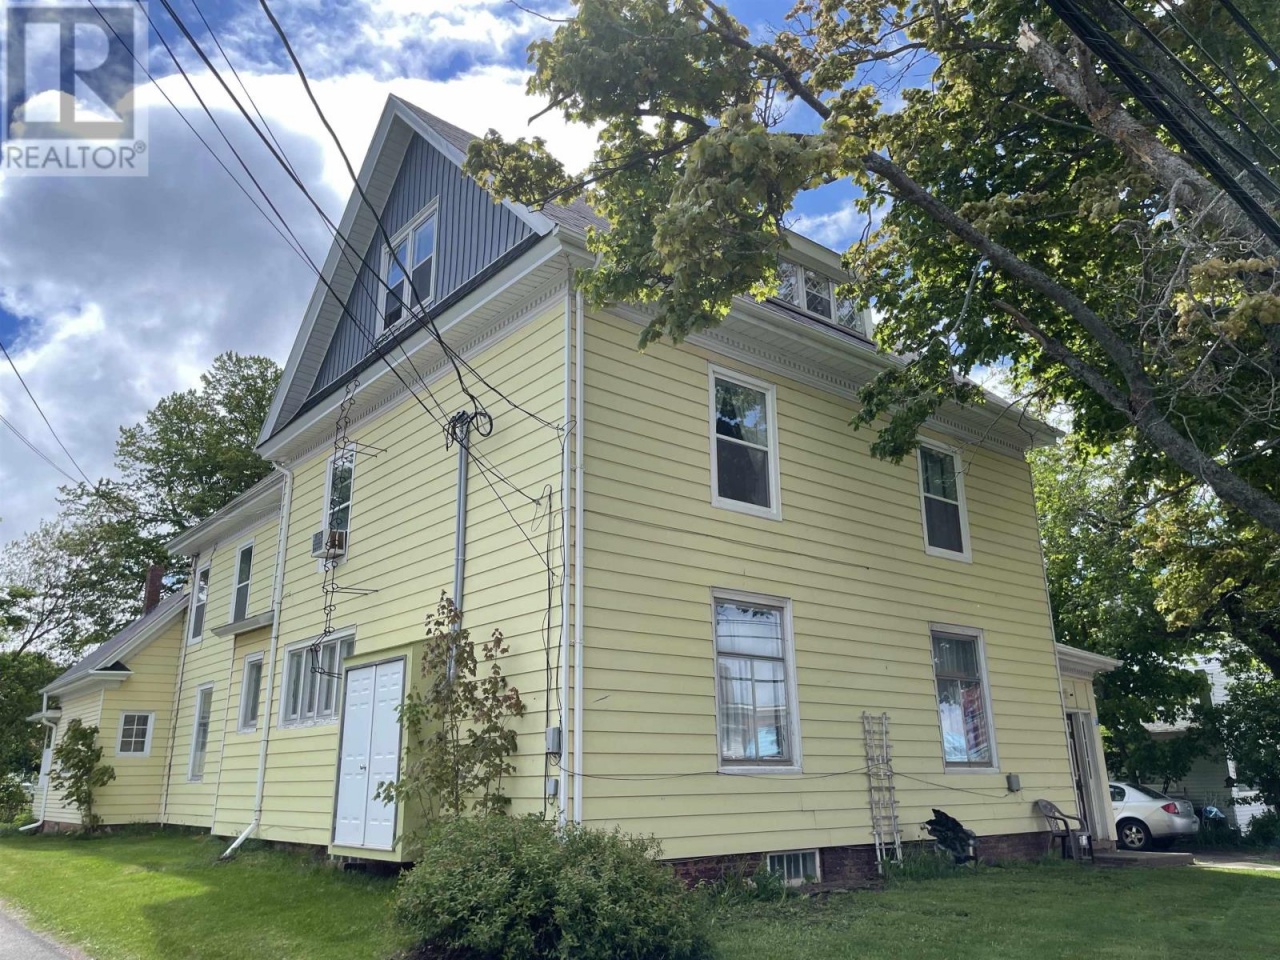 67 Central Street67 Central Street, Summerside, Prince Edward Island C1N3L2, ,Multi-family,For Sale,67 Central Street,202302020